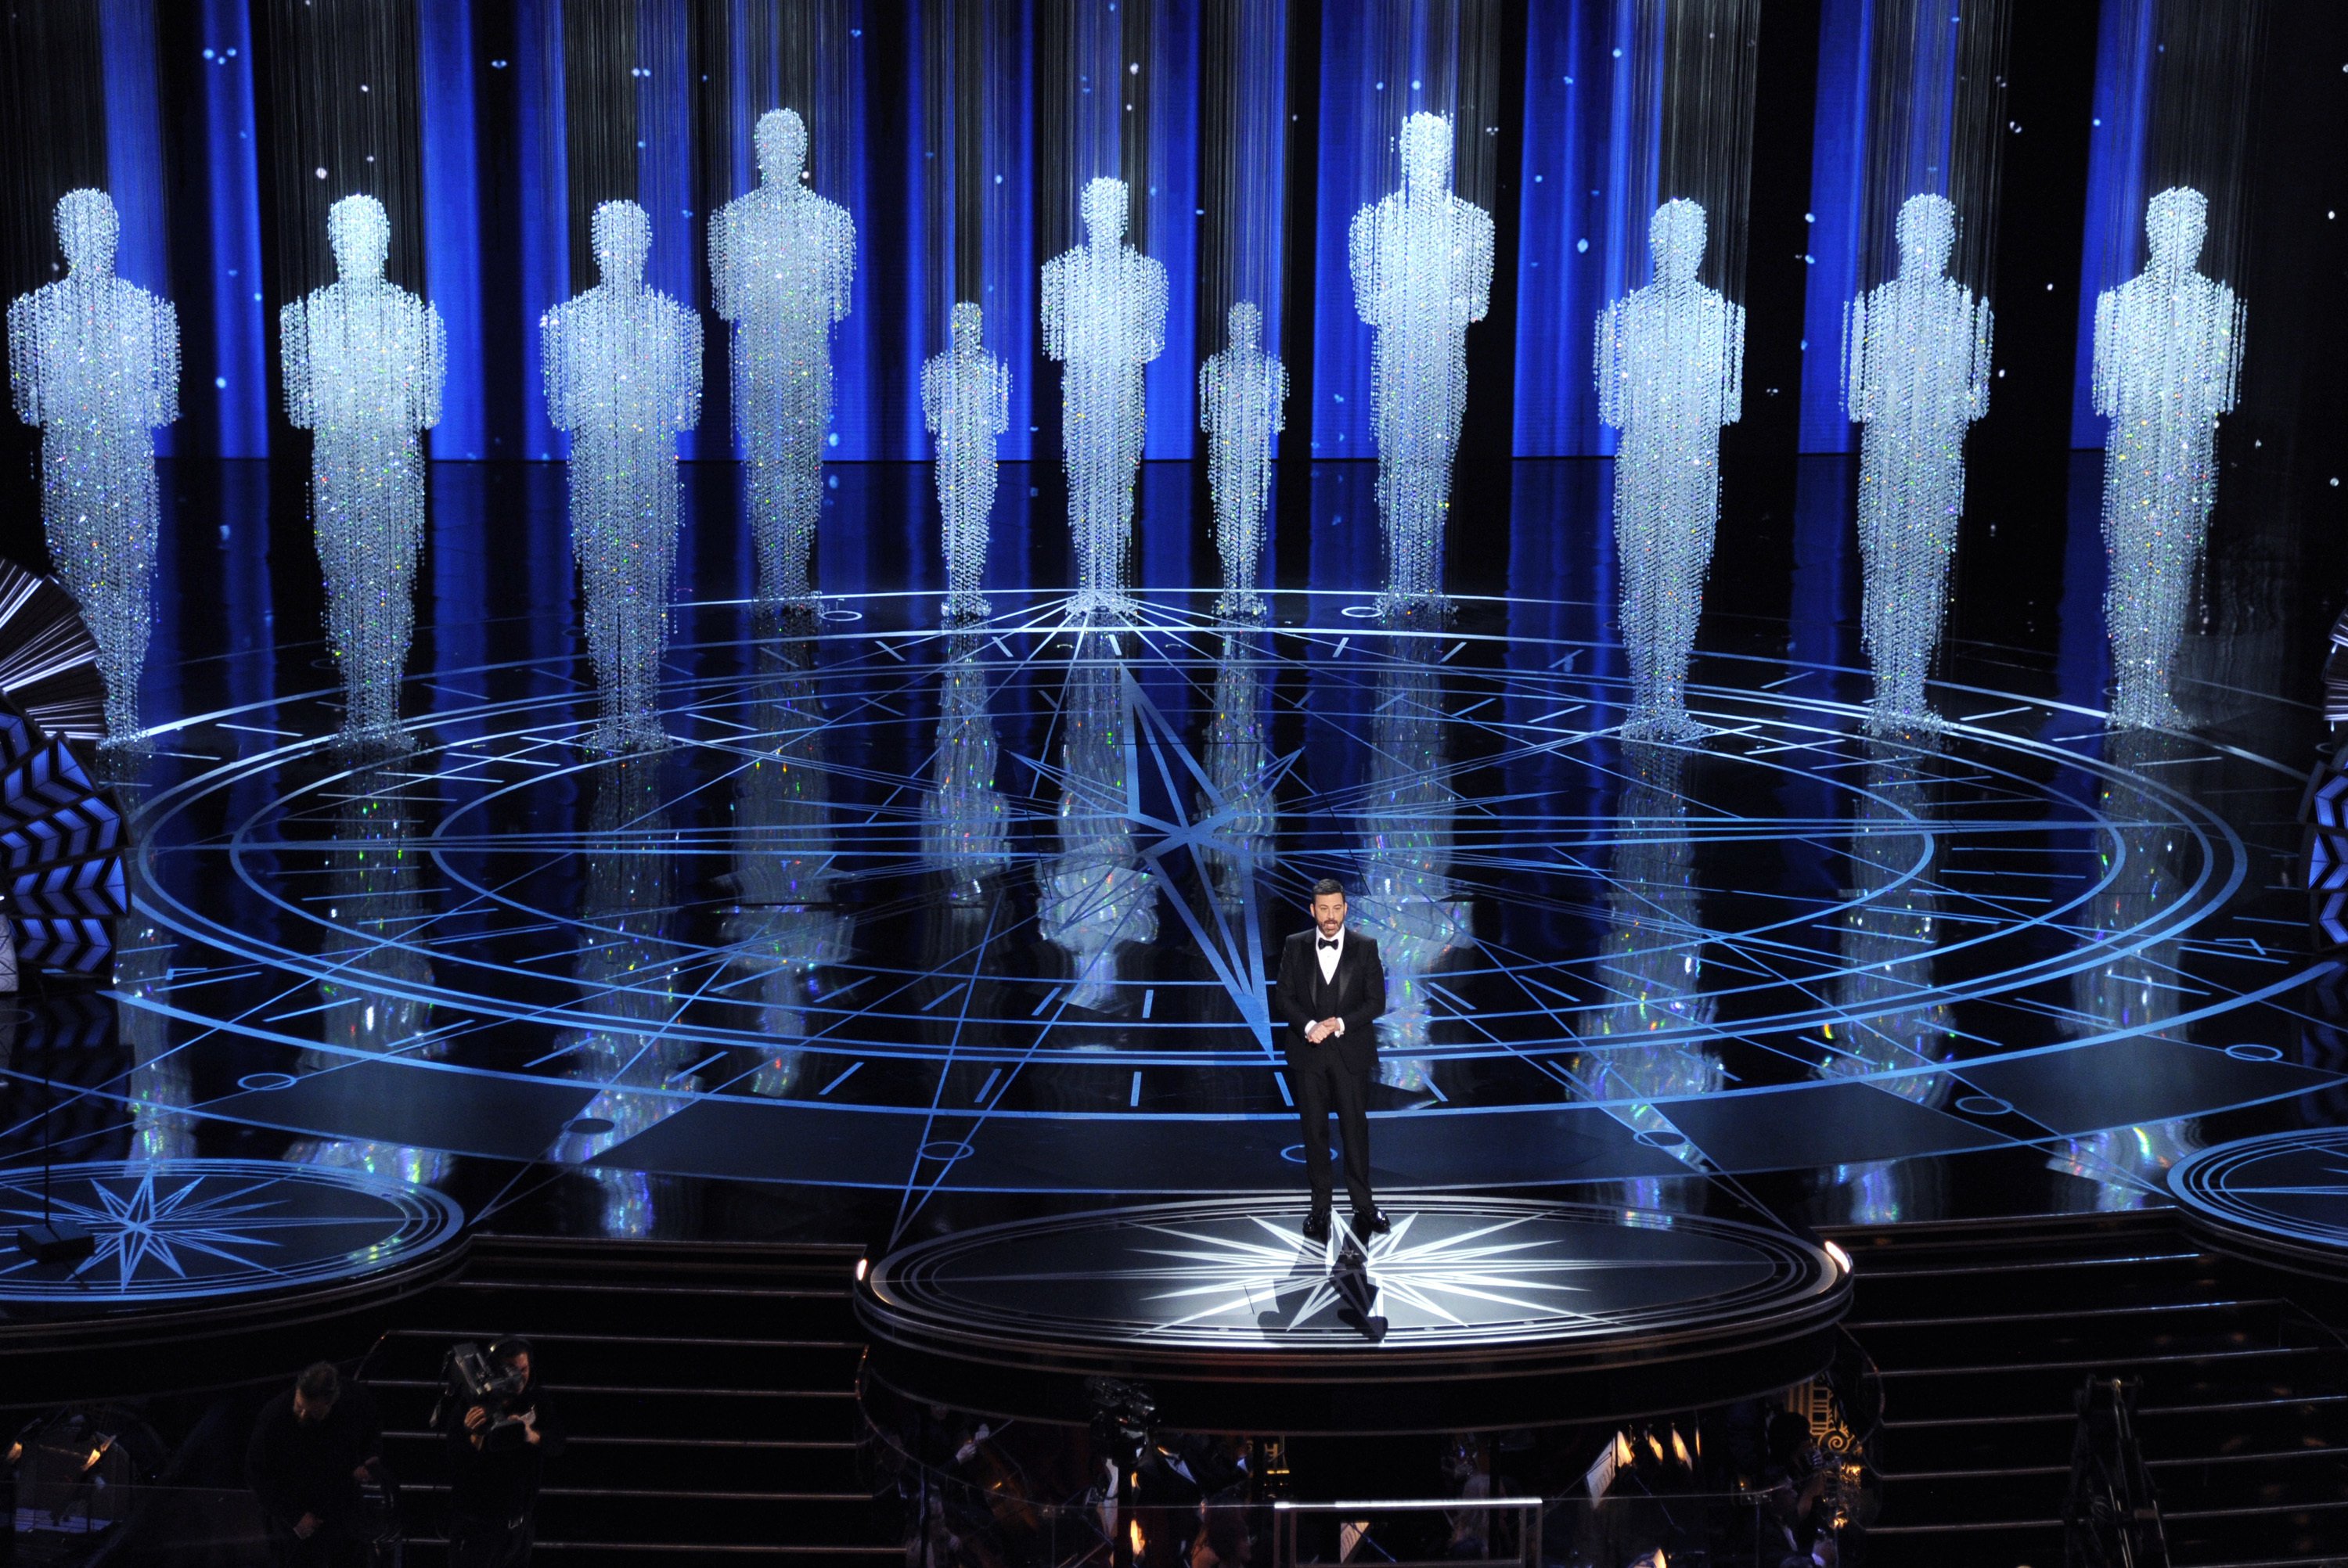 Are the Oscars going to have a ‘who cares’ moment if the ratings dive?